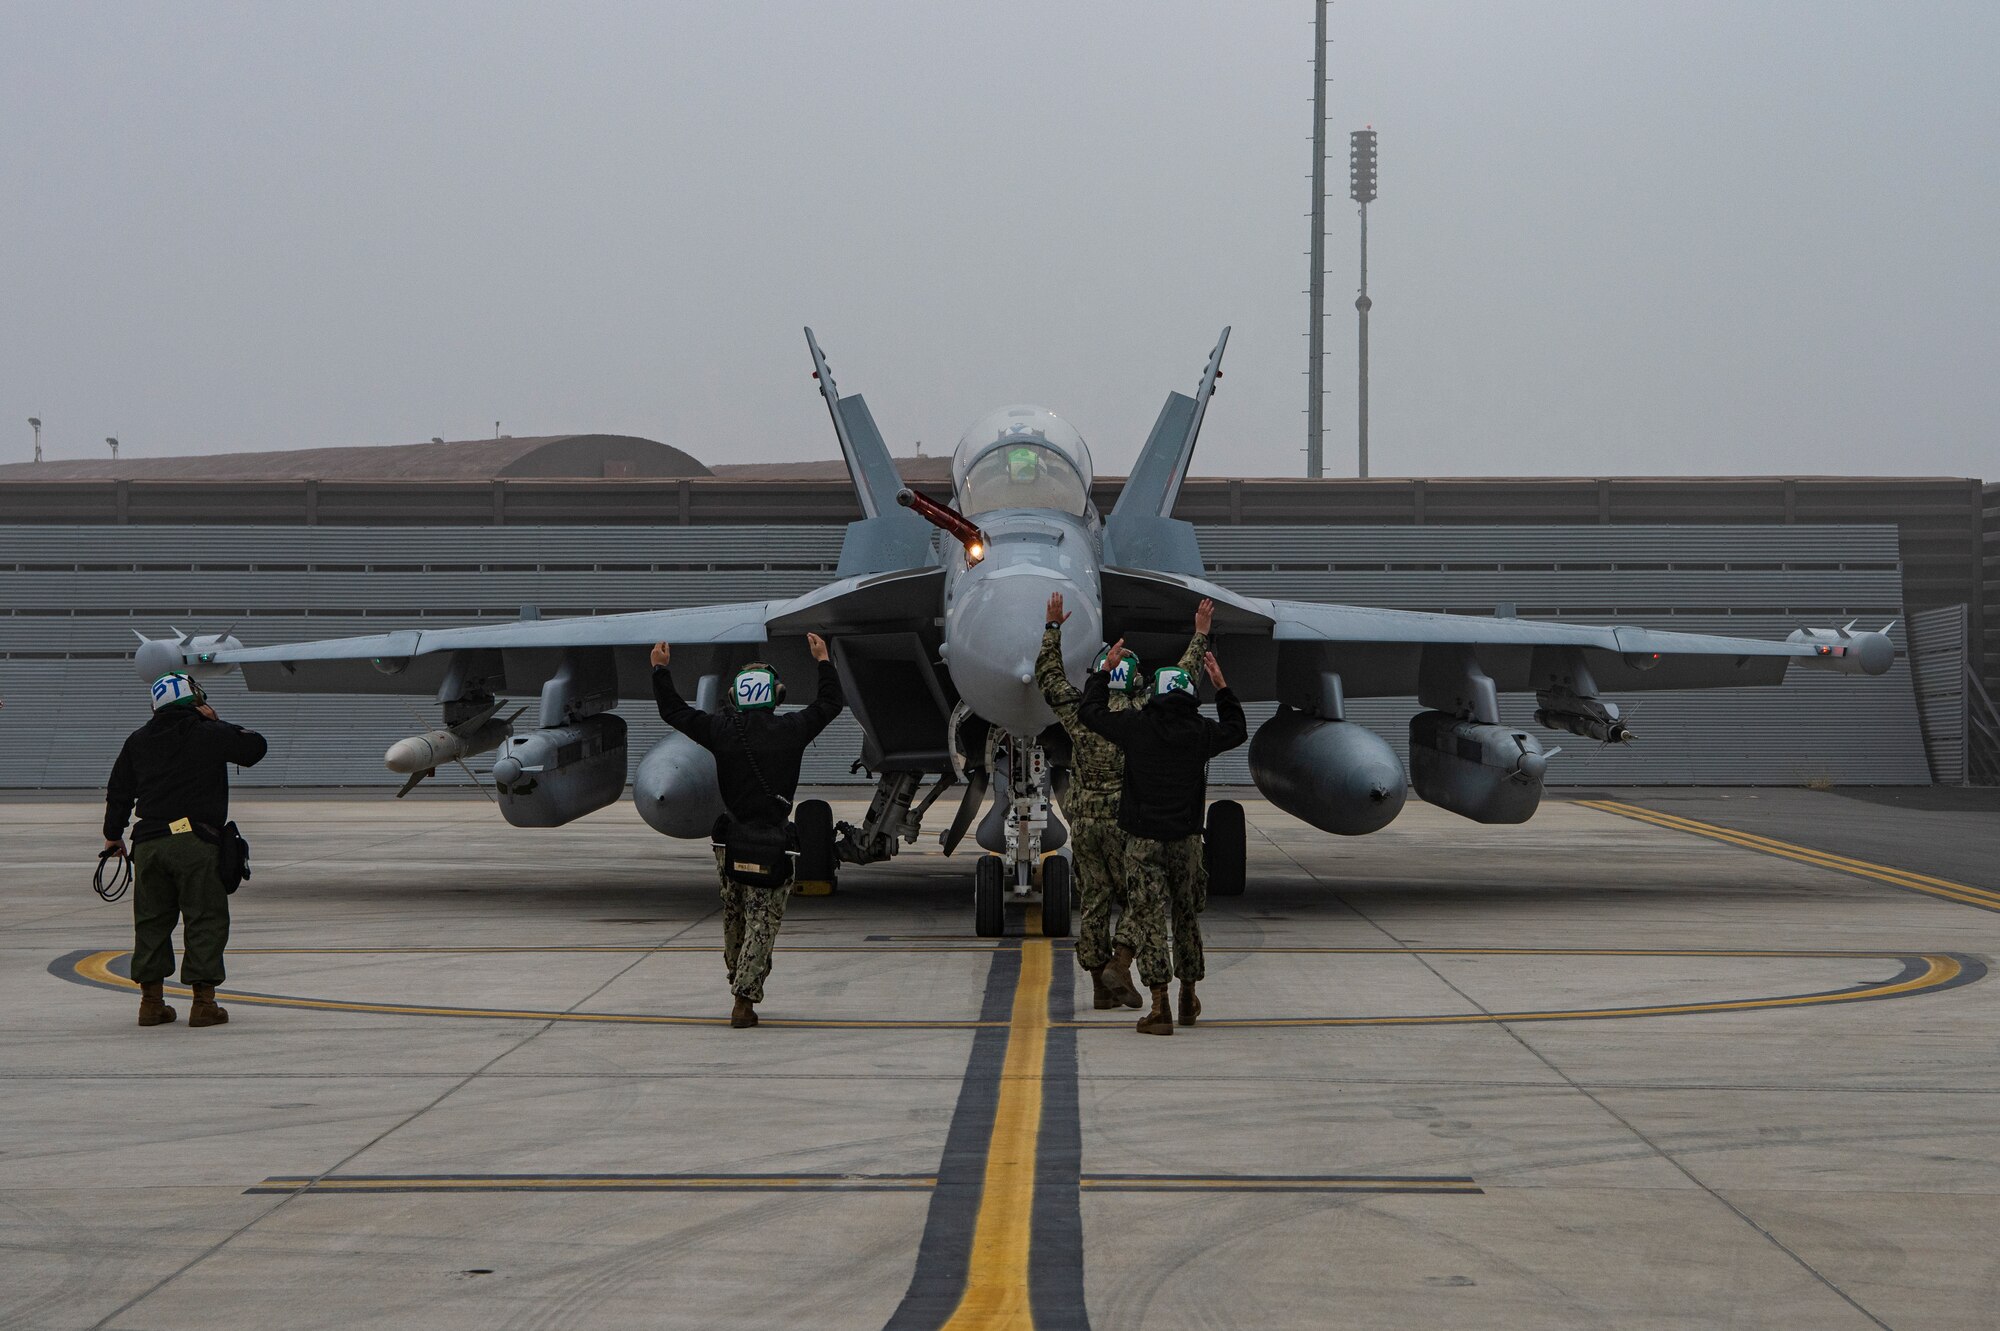 U.S. Navy Airmen assigned to the Electronic Attack Squadron (VAQ) 131 at Naval Air Station Whidbey Island, Washington, perform preflight procedures for EA-18G Growlers during Vigilant Storm 23 at Osan Air Base, Republic of Korea, Nov. 1, 2022.